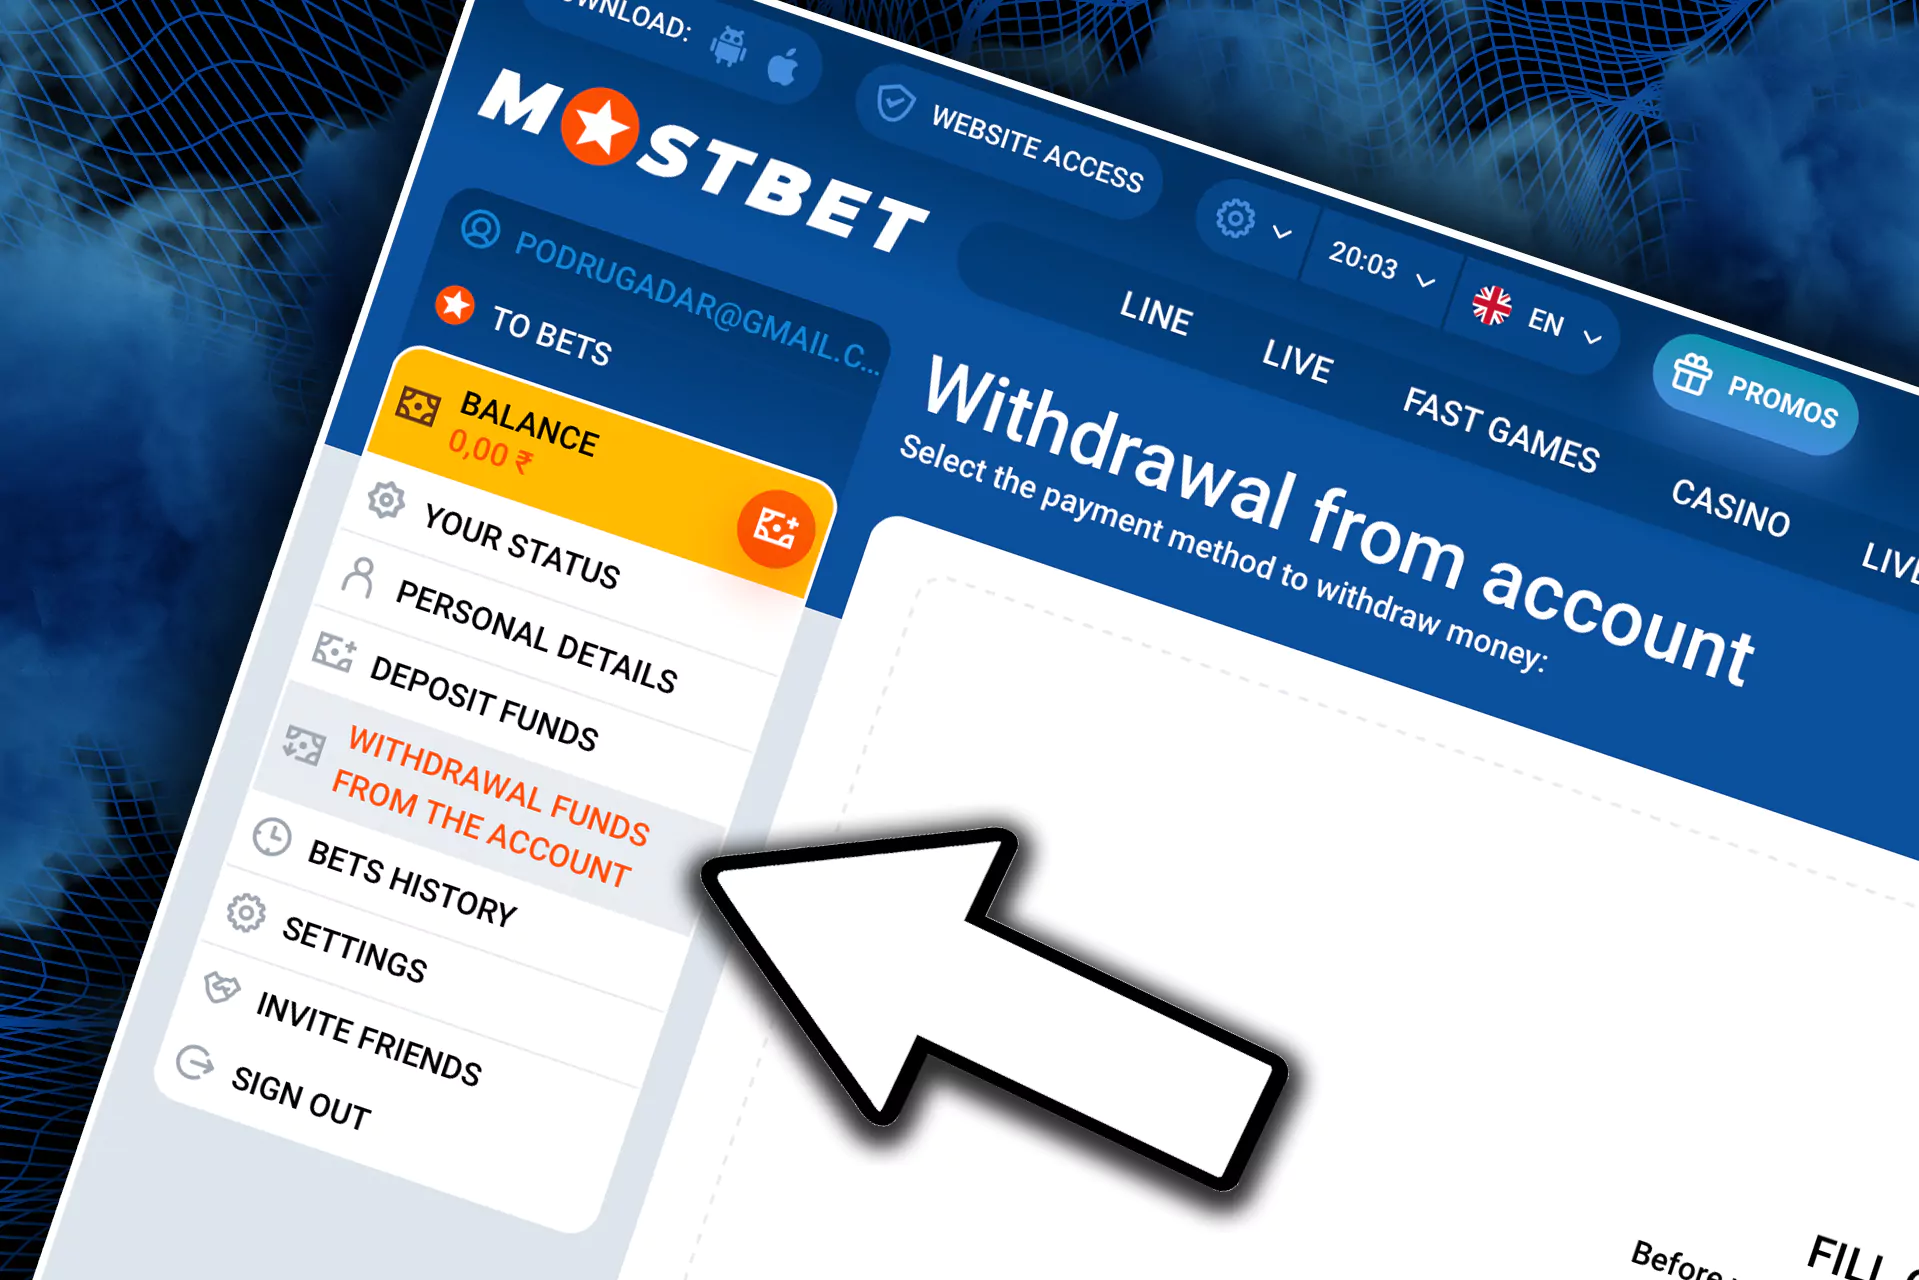 You can easily deposit and withdraw money in the Mostbet app.